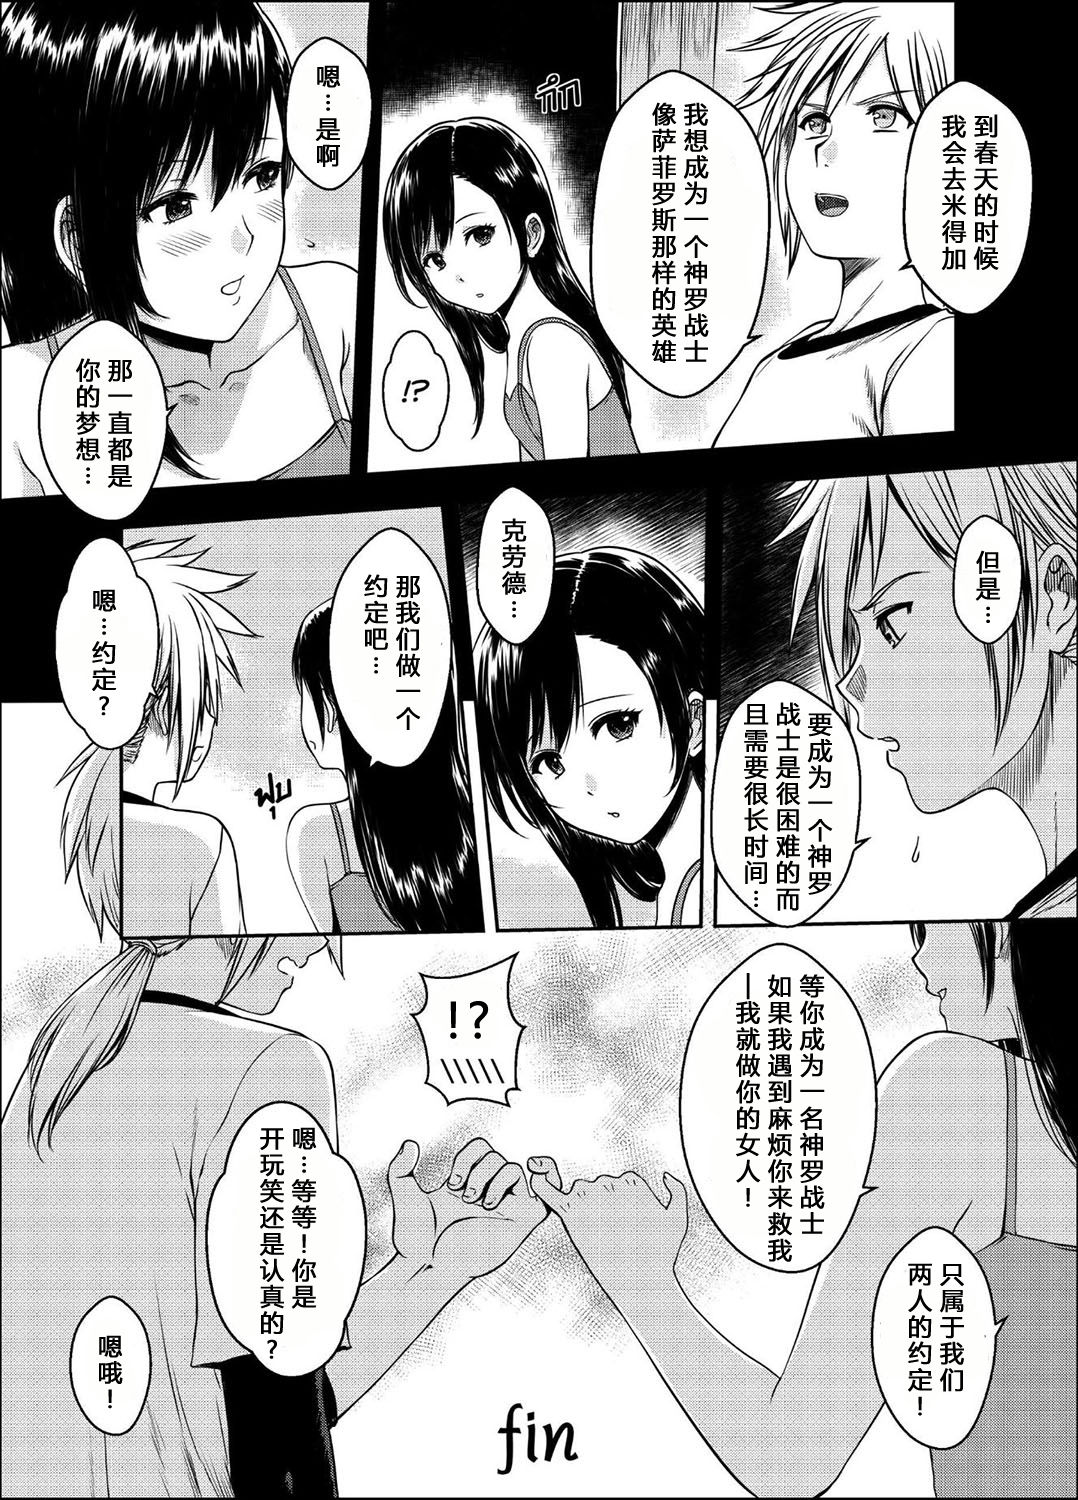 [XTER] OUR [X] PROMISE (Final Fantasy VII) [汉化] [XTER] OUR [X] PROMISE (Final Fantasy VII) [chinese]